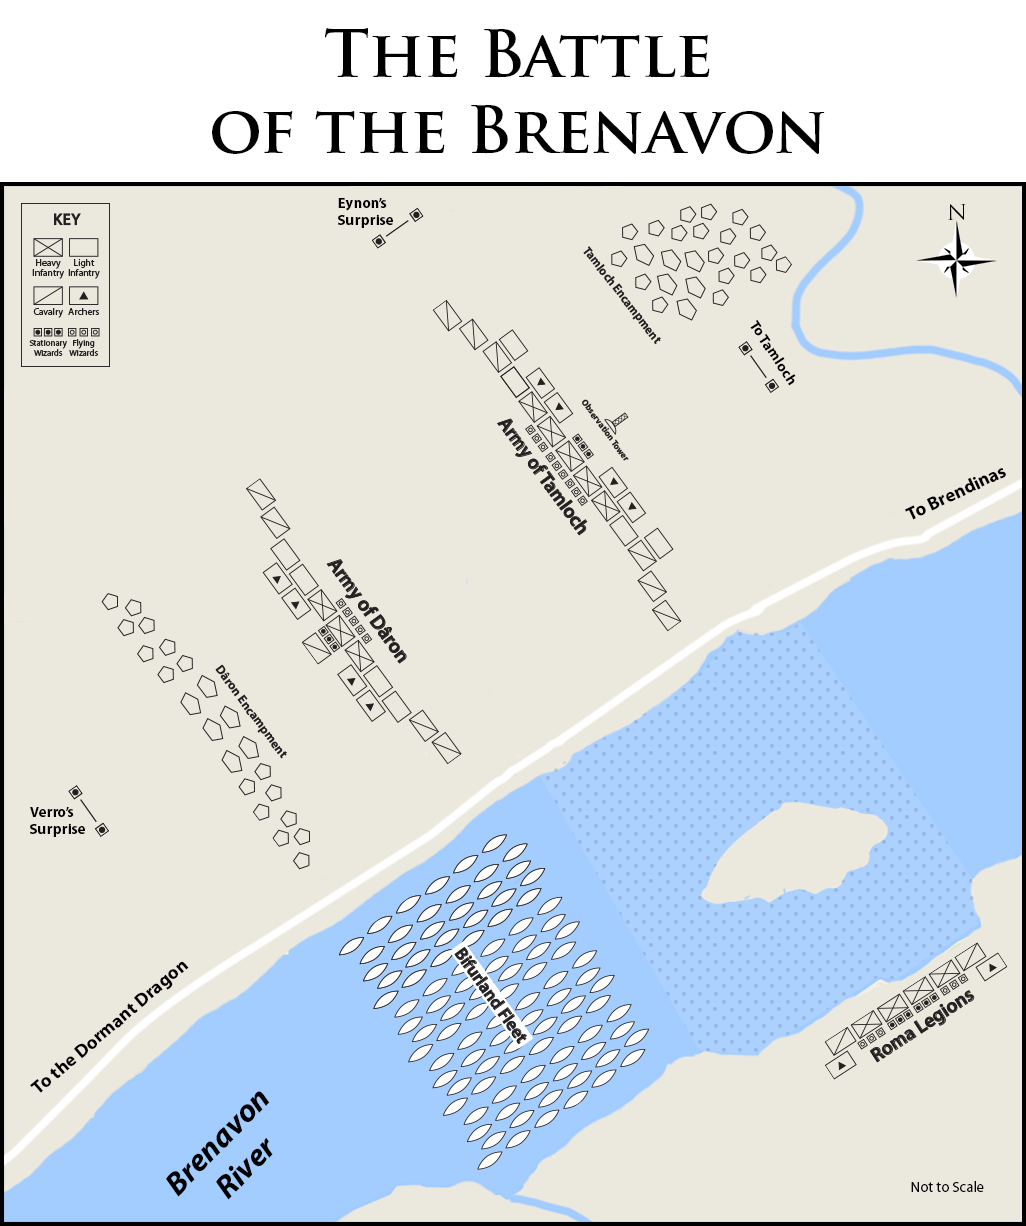 The Battle of the Brenavon